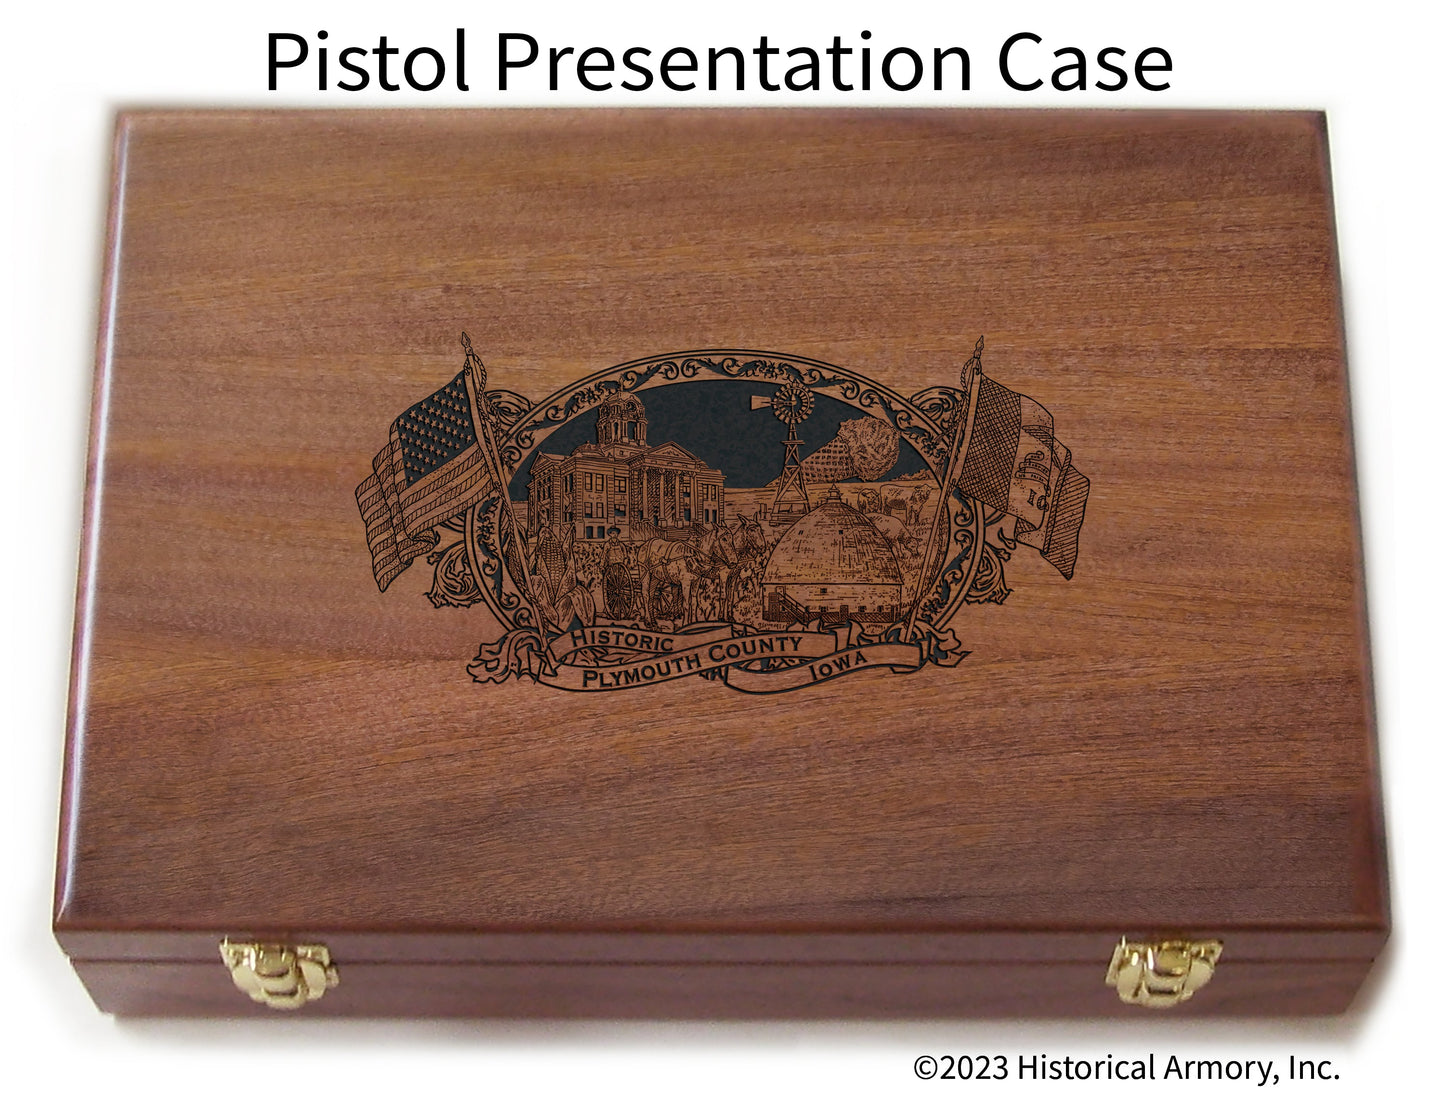 Plymouth County Iowa Engraved .45 Auto Ruger 1911 Presentation Case